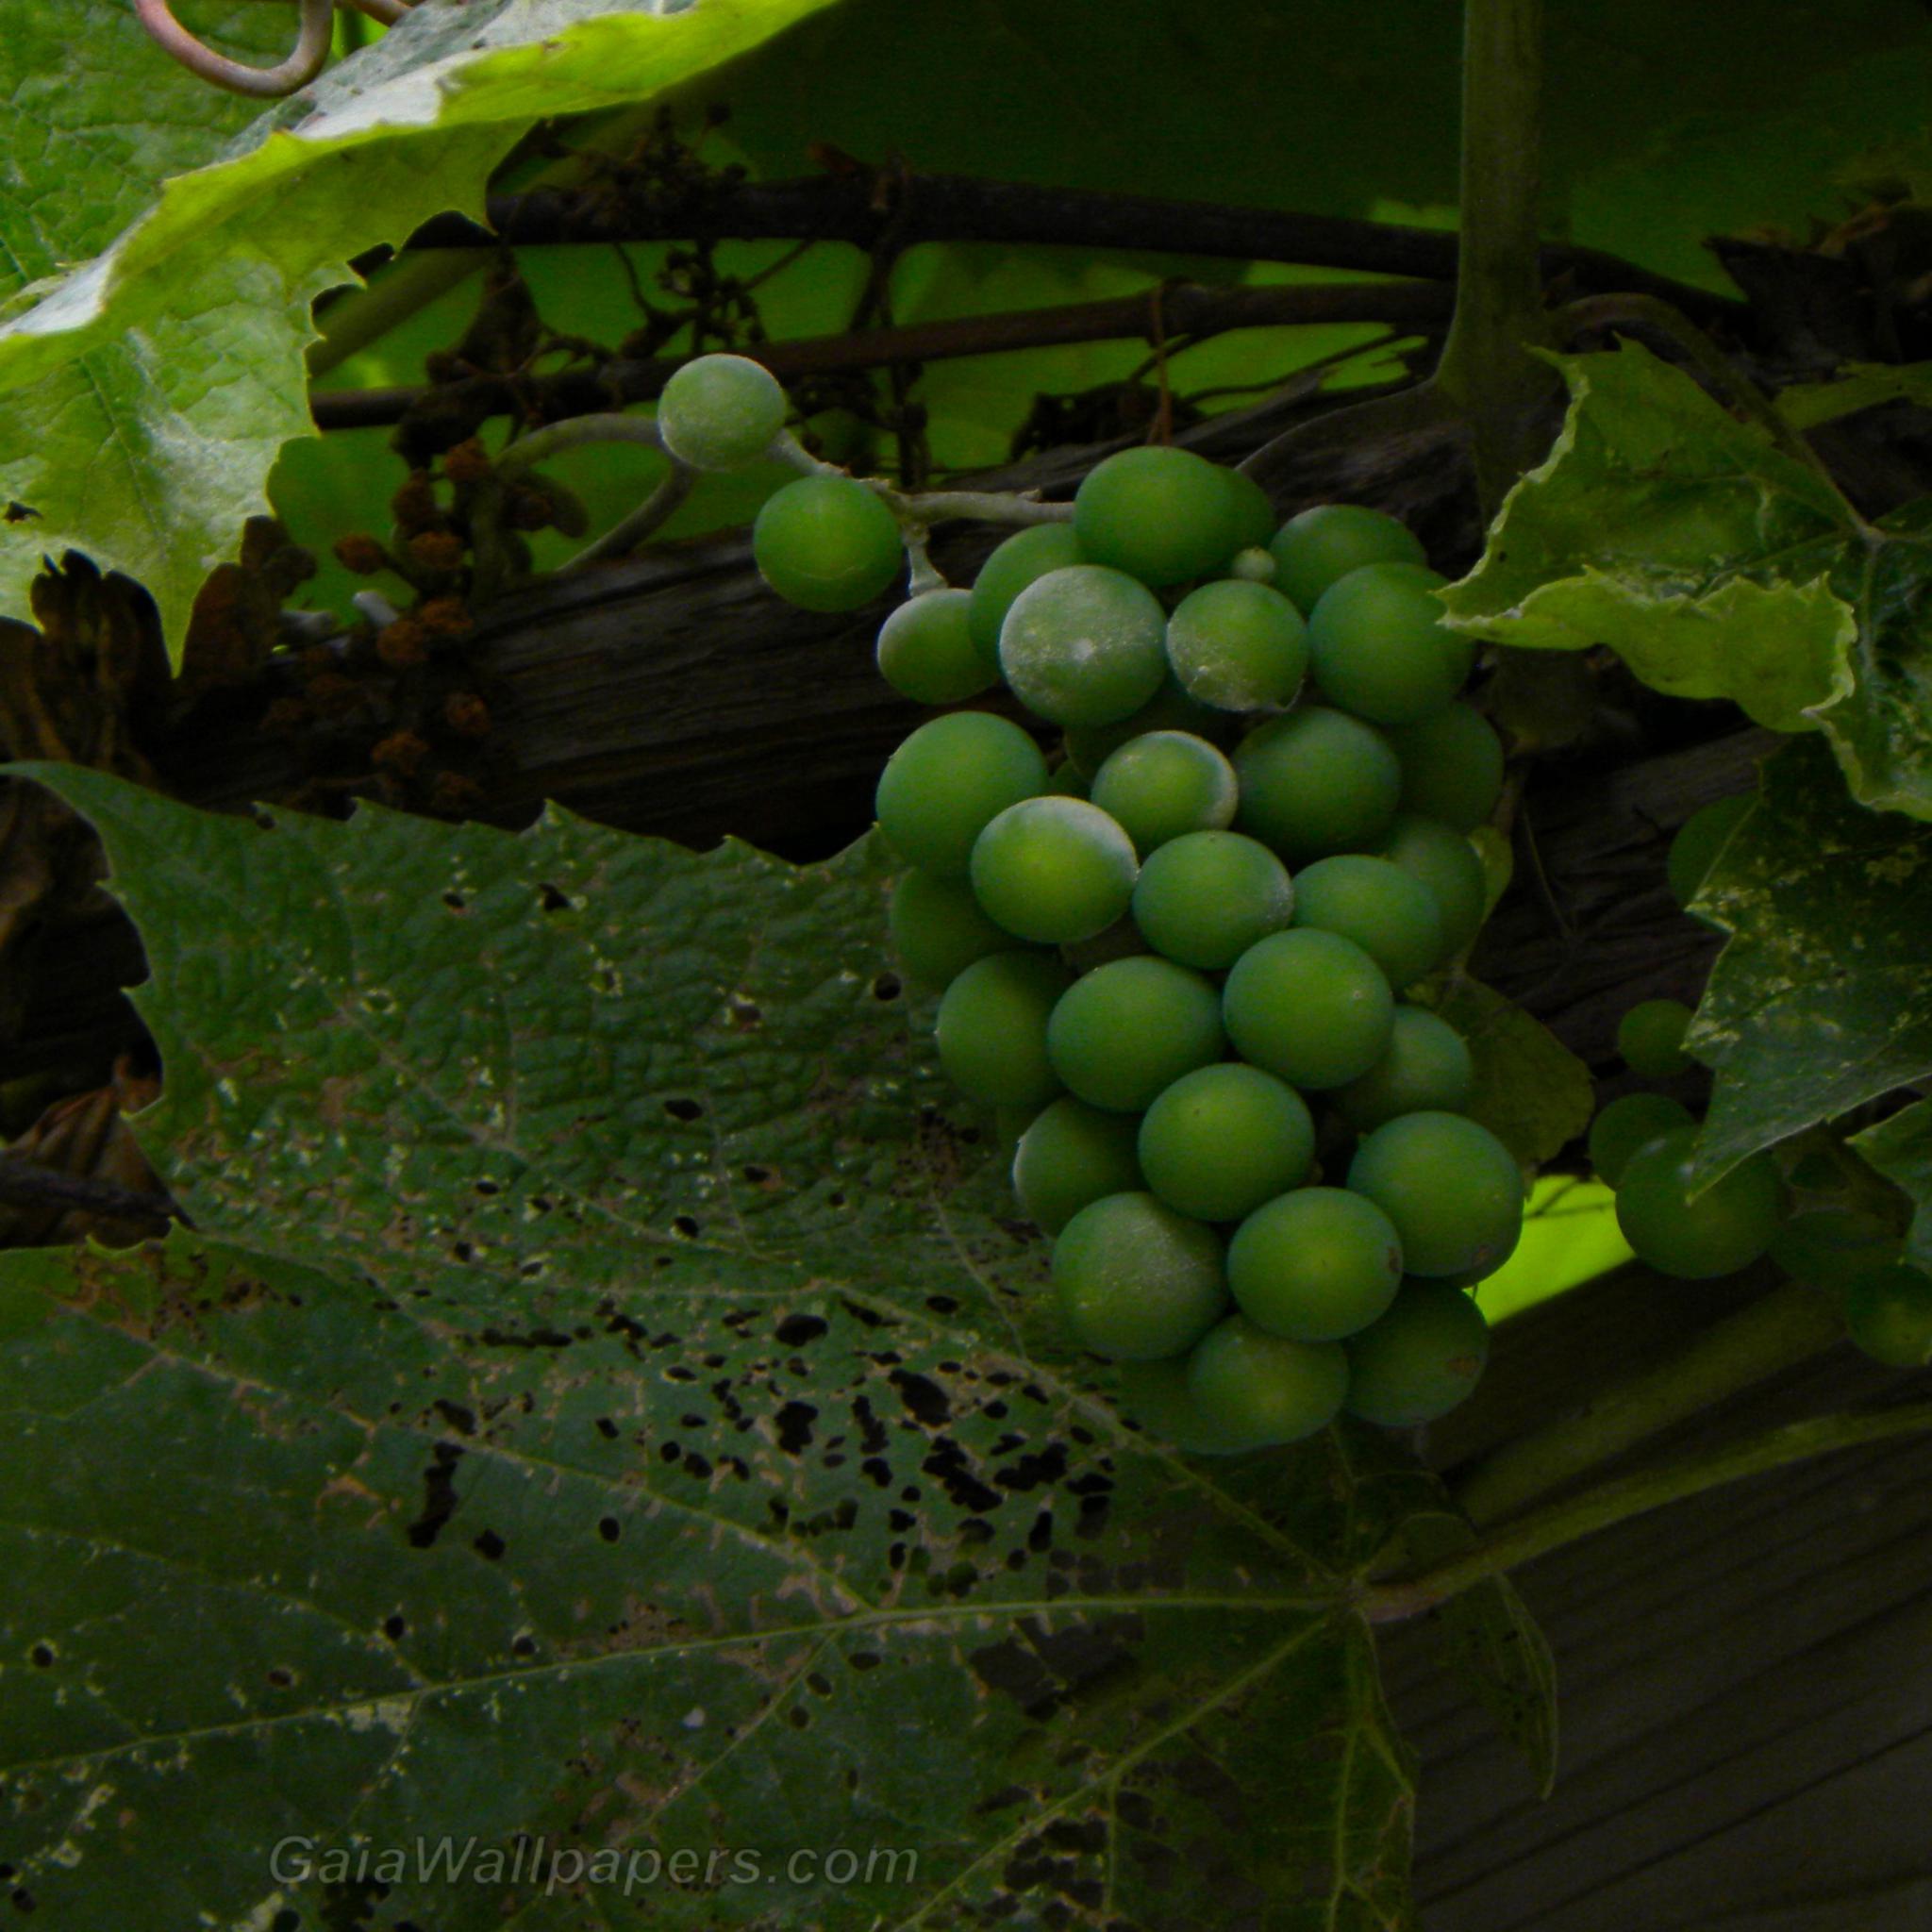 Grapes on the vine - Free desktop wallpapers